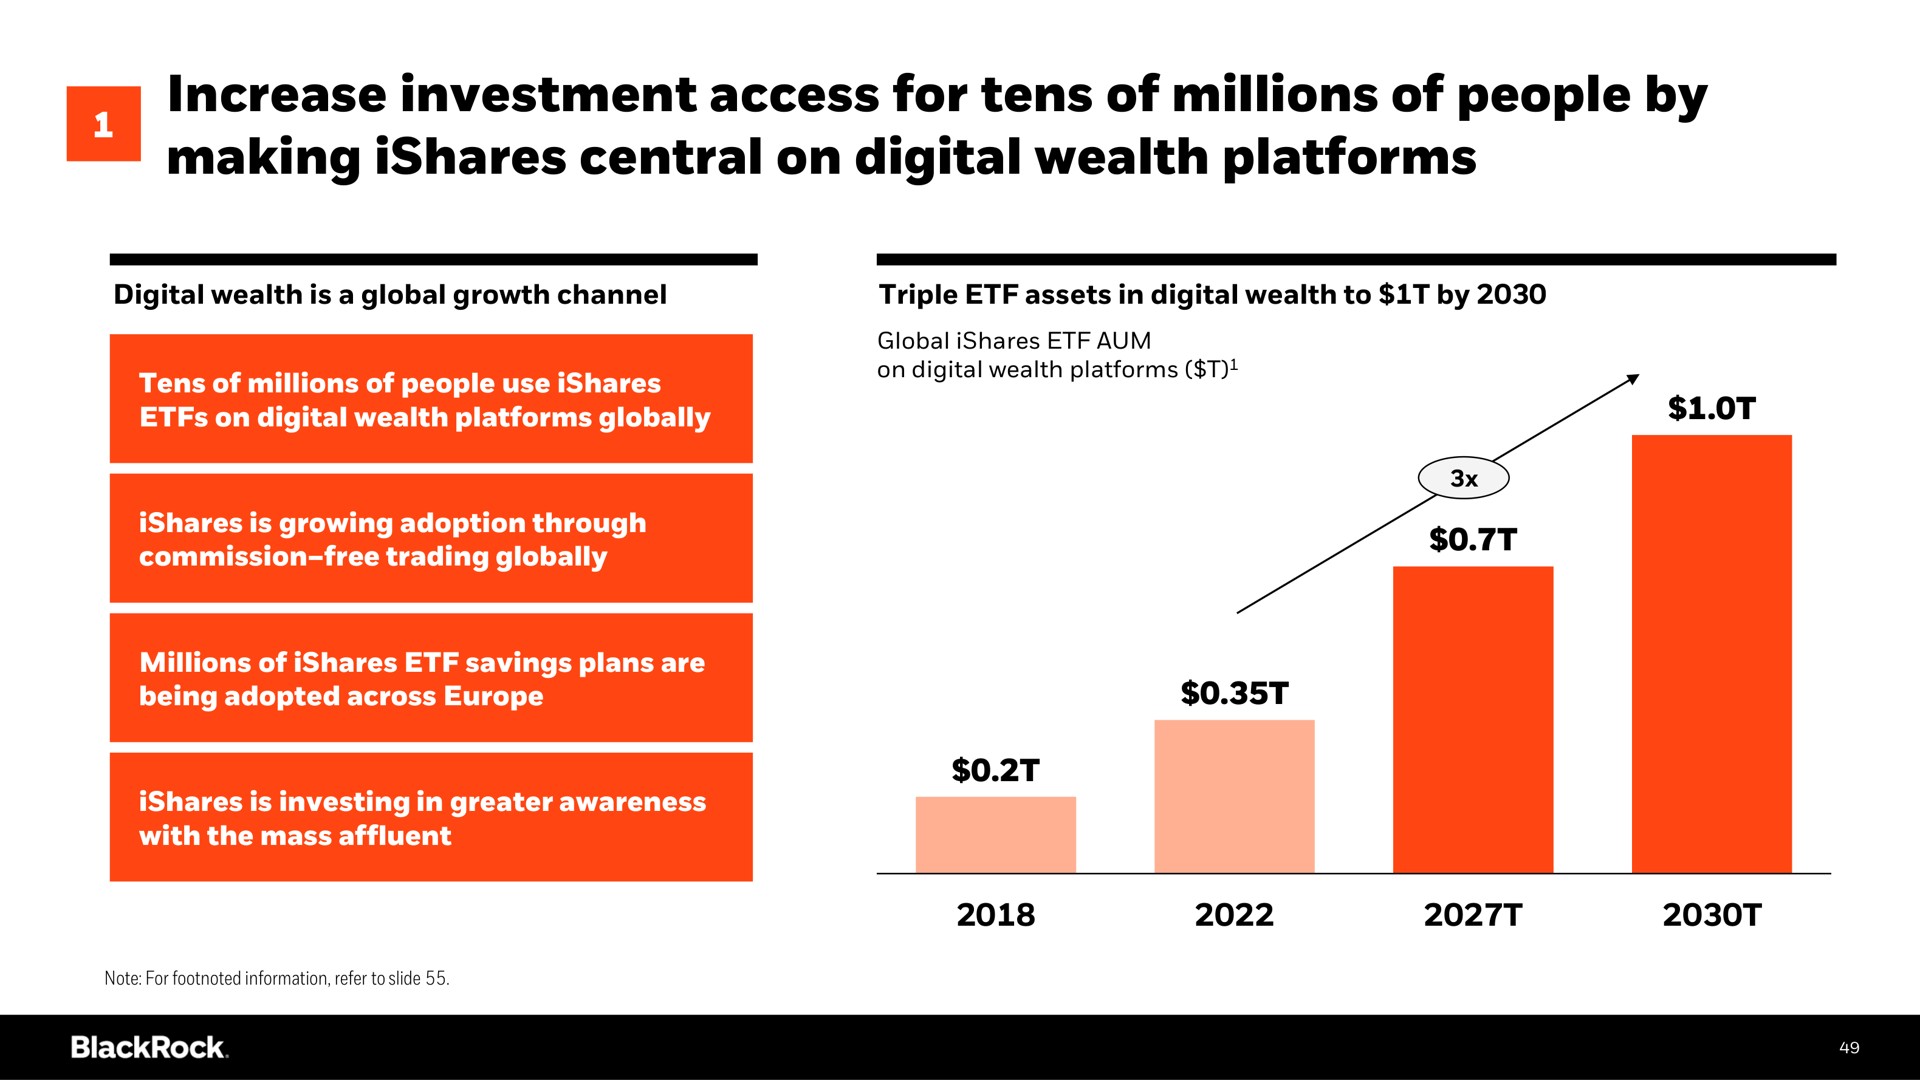 increase investment access for tens of millions of people by making central on digital wealth platforms | BlackRock